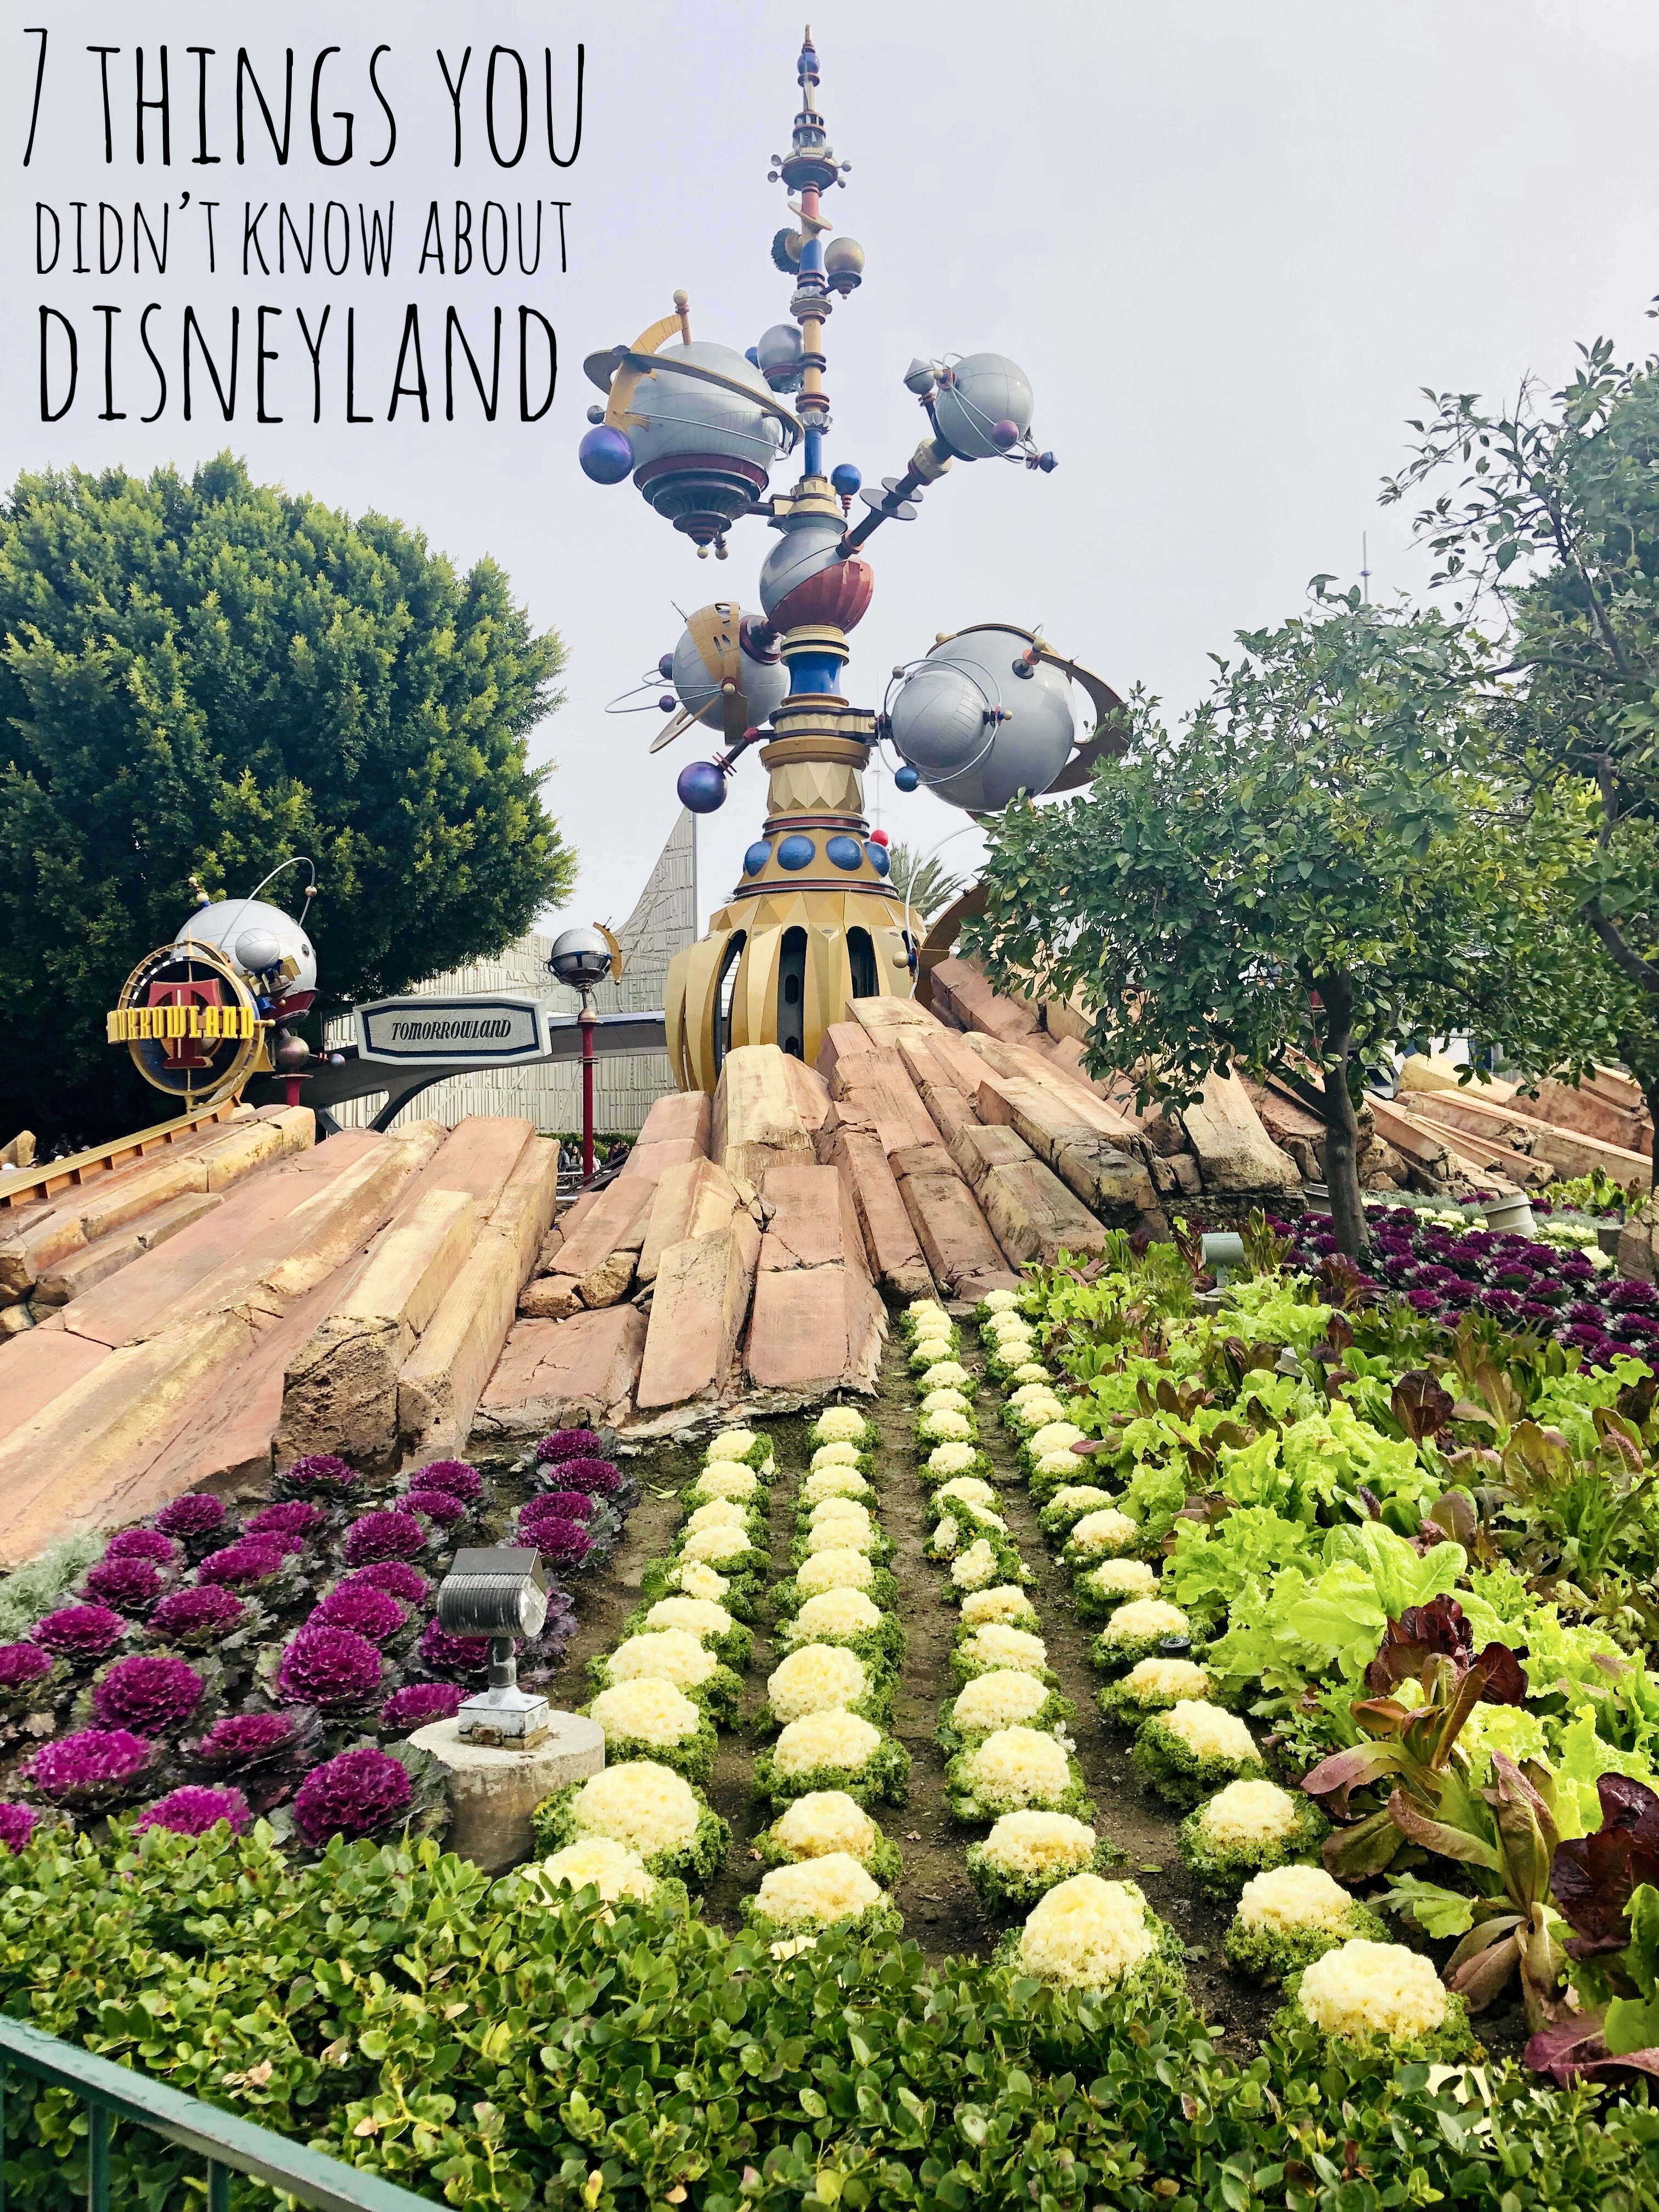 7 Things you didn't know about Disneyland